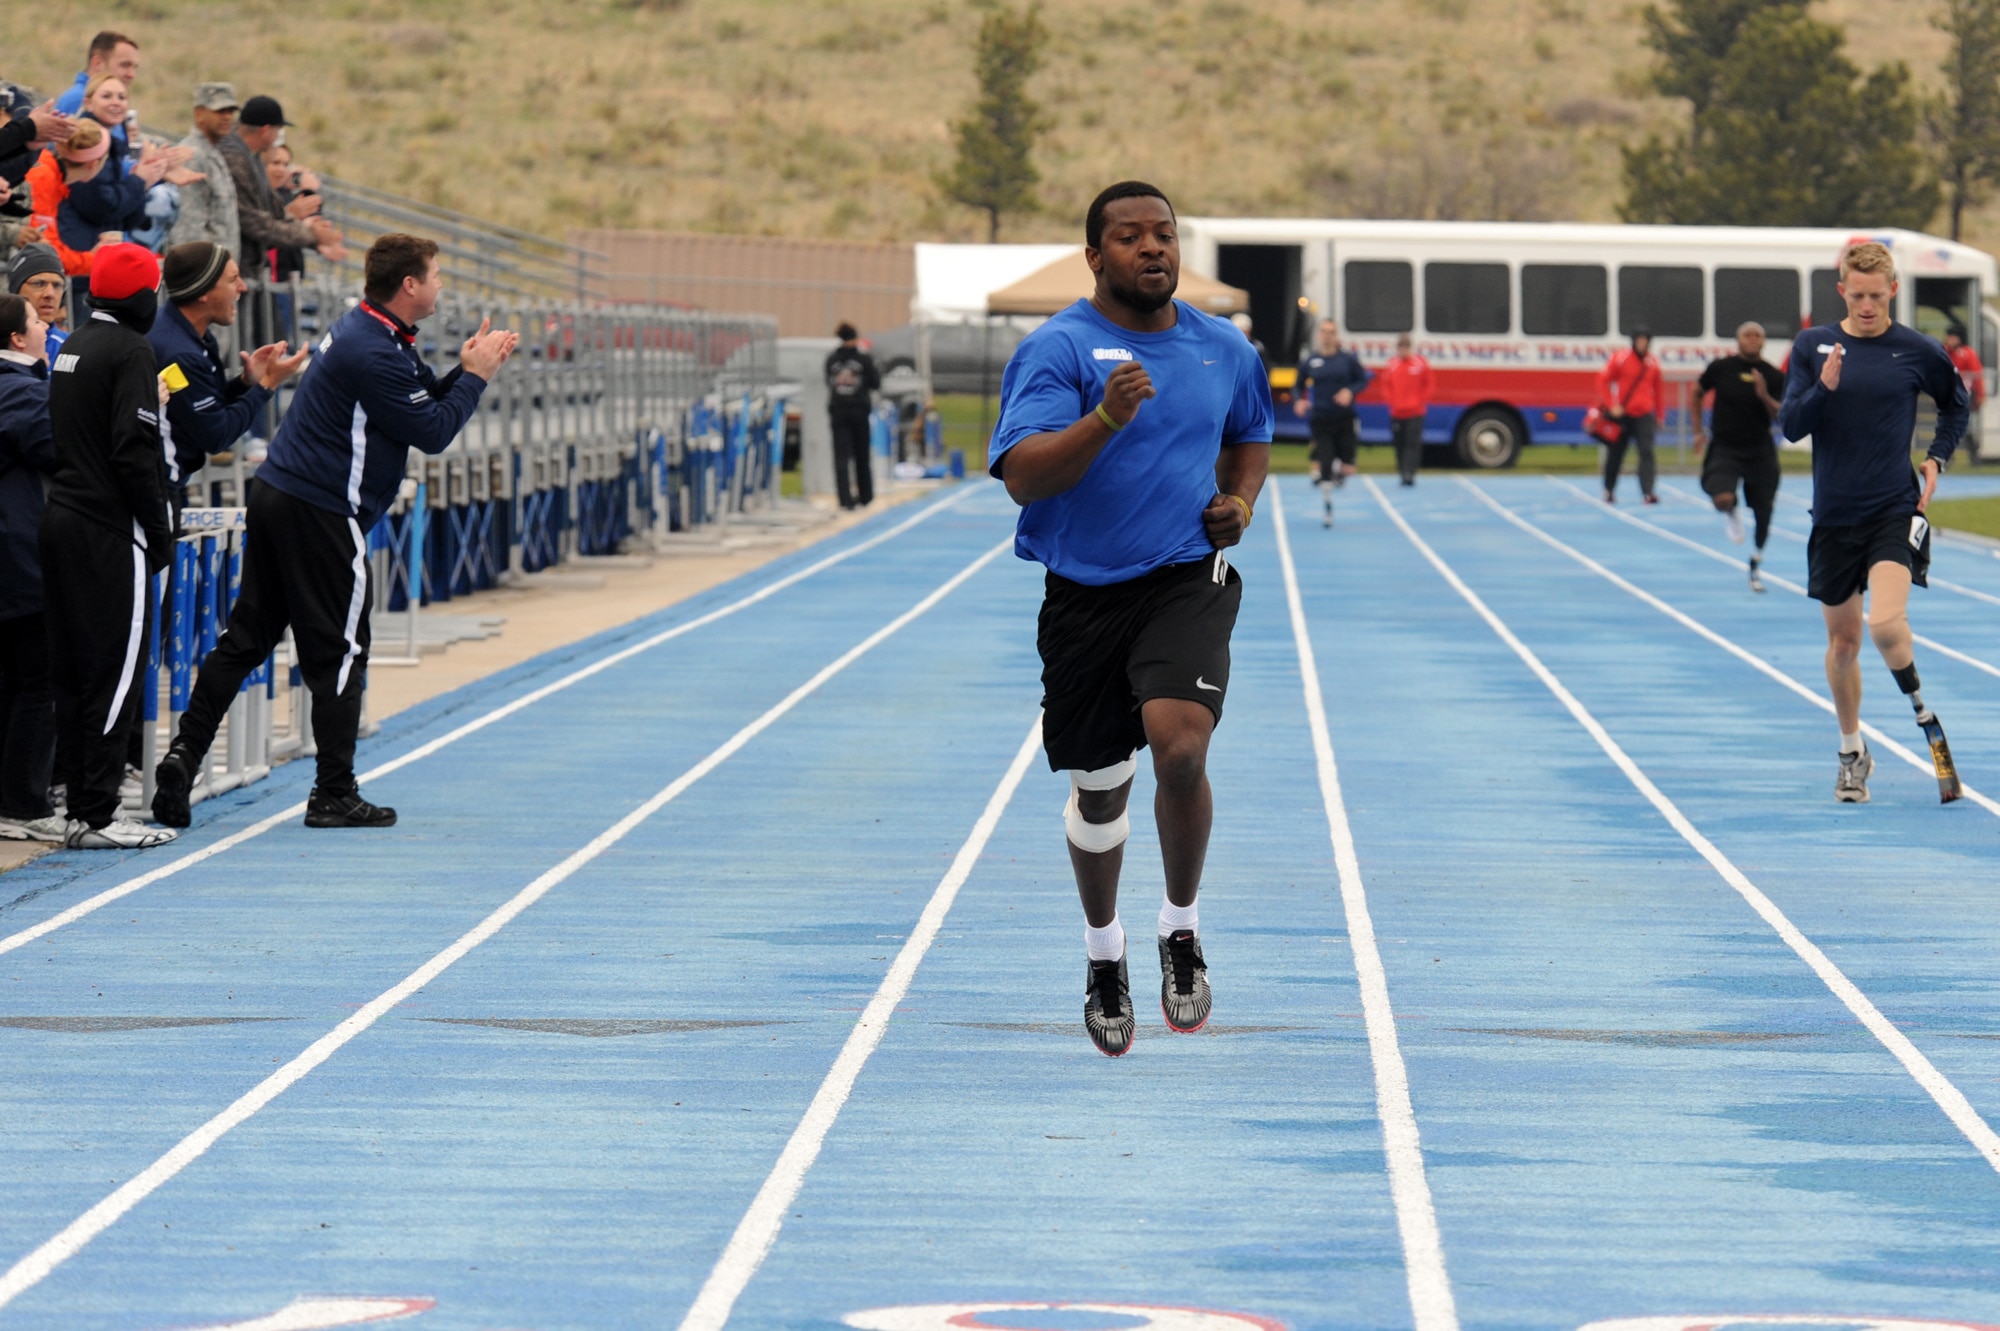 Air Force team member Matt Sanders competes in a track event during the Warrior Games at the U.S. Air Force Academy track in Colorado Springs, Colo., May 14, 2010. Sanders led the Air Force track and field team with three medals, earning a gold in the 400-meter and the 200-meter races and a silver in the 100-meter sprint.  (U.S. Air Force photo/Staff Sgt. Desiree N. Palacios)